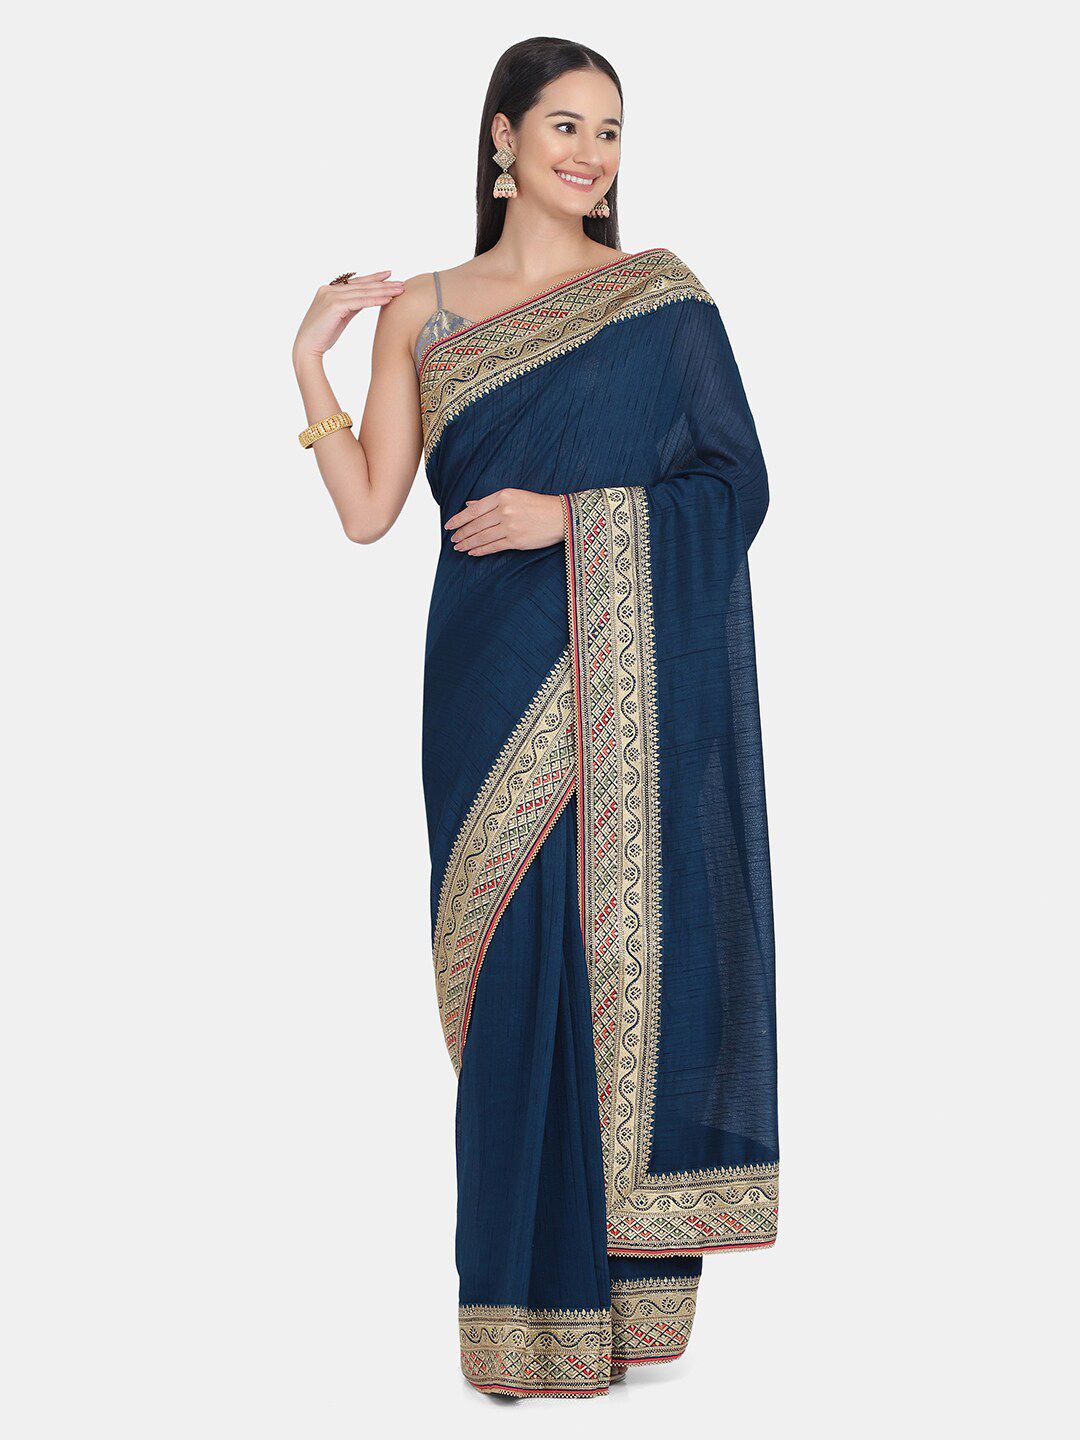 BOMBAY SELECTIONS Blue & Gold-Toned Art Silk Saree Price in India